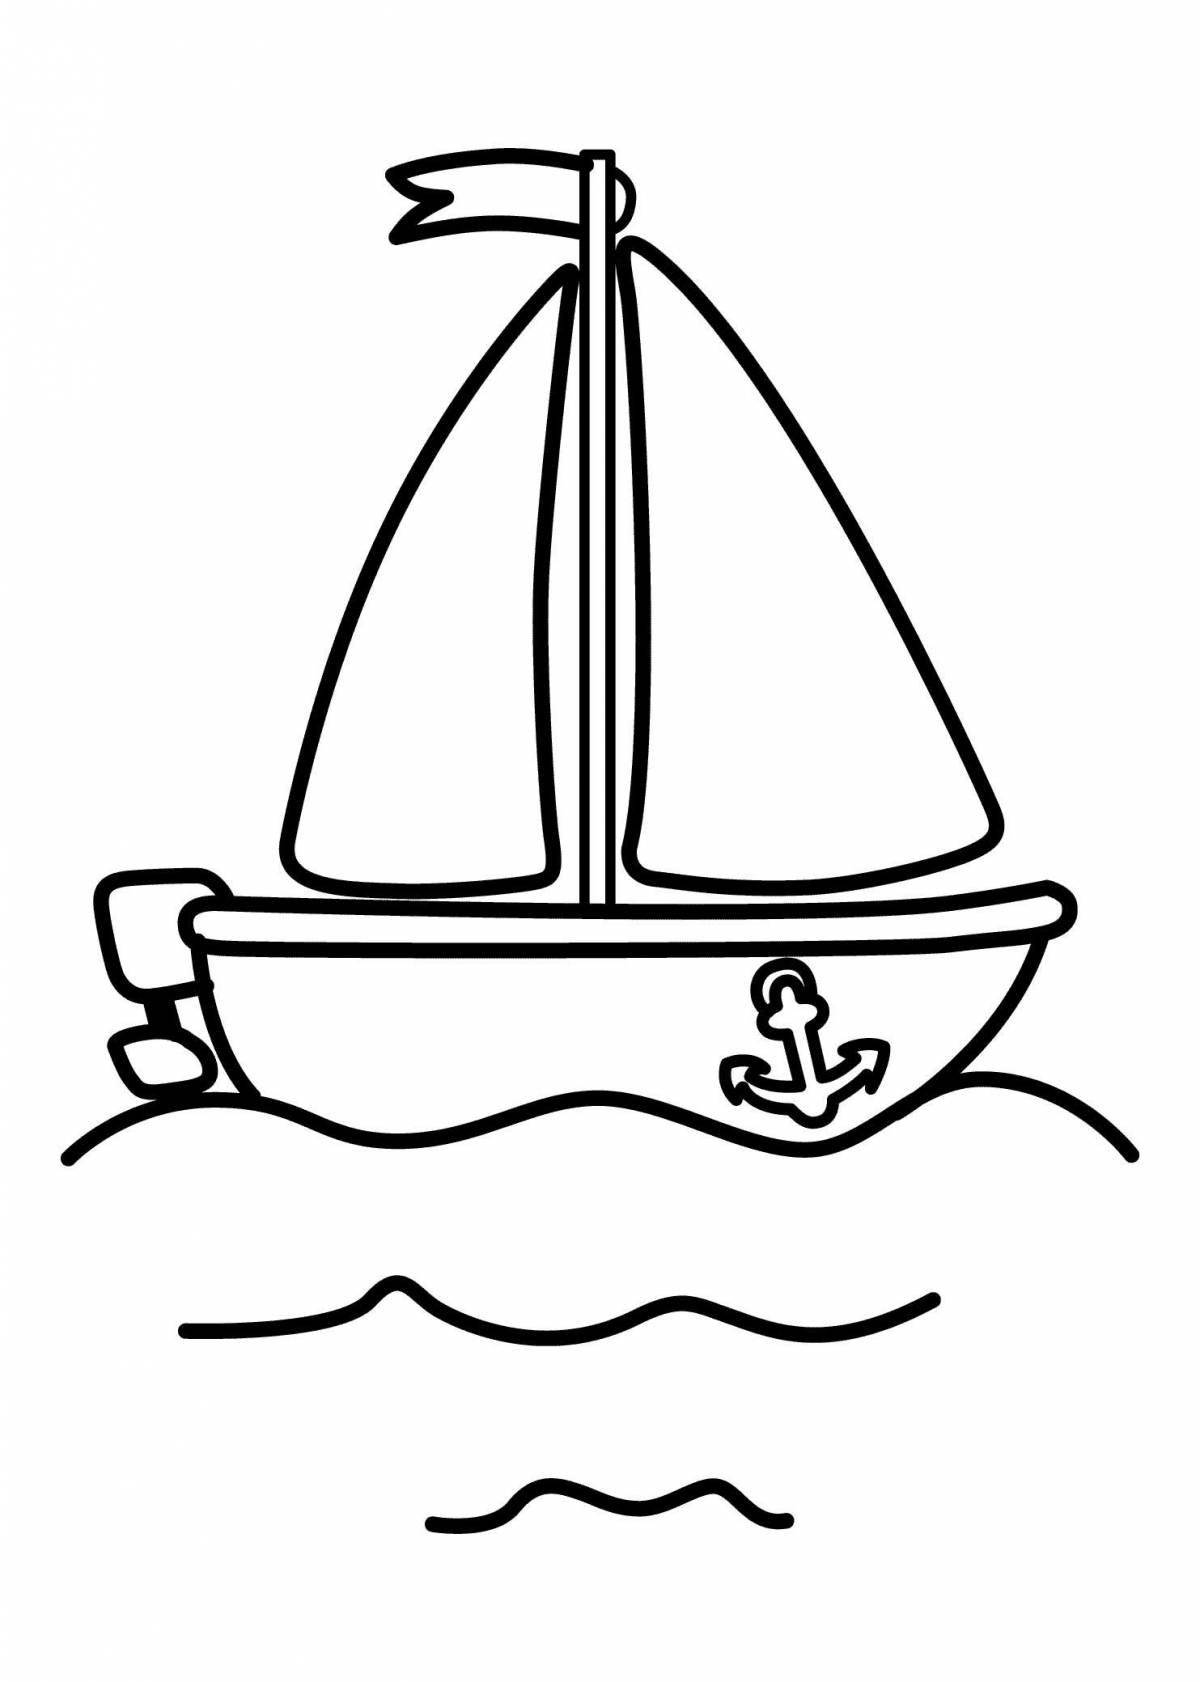 Live boat coloring for kids